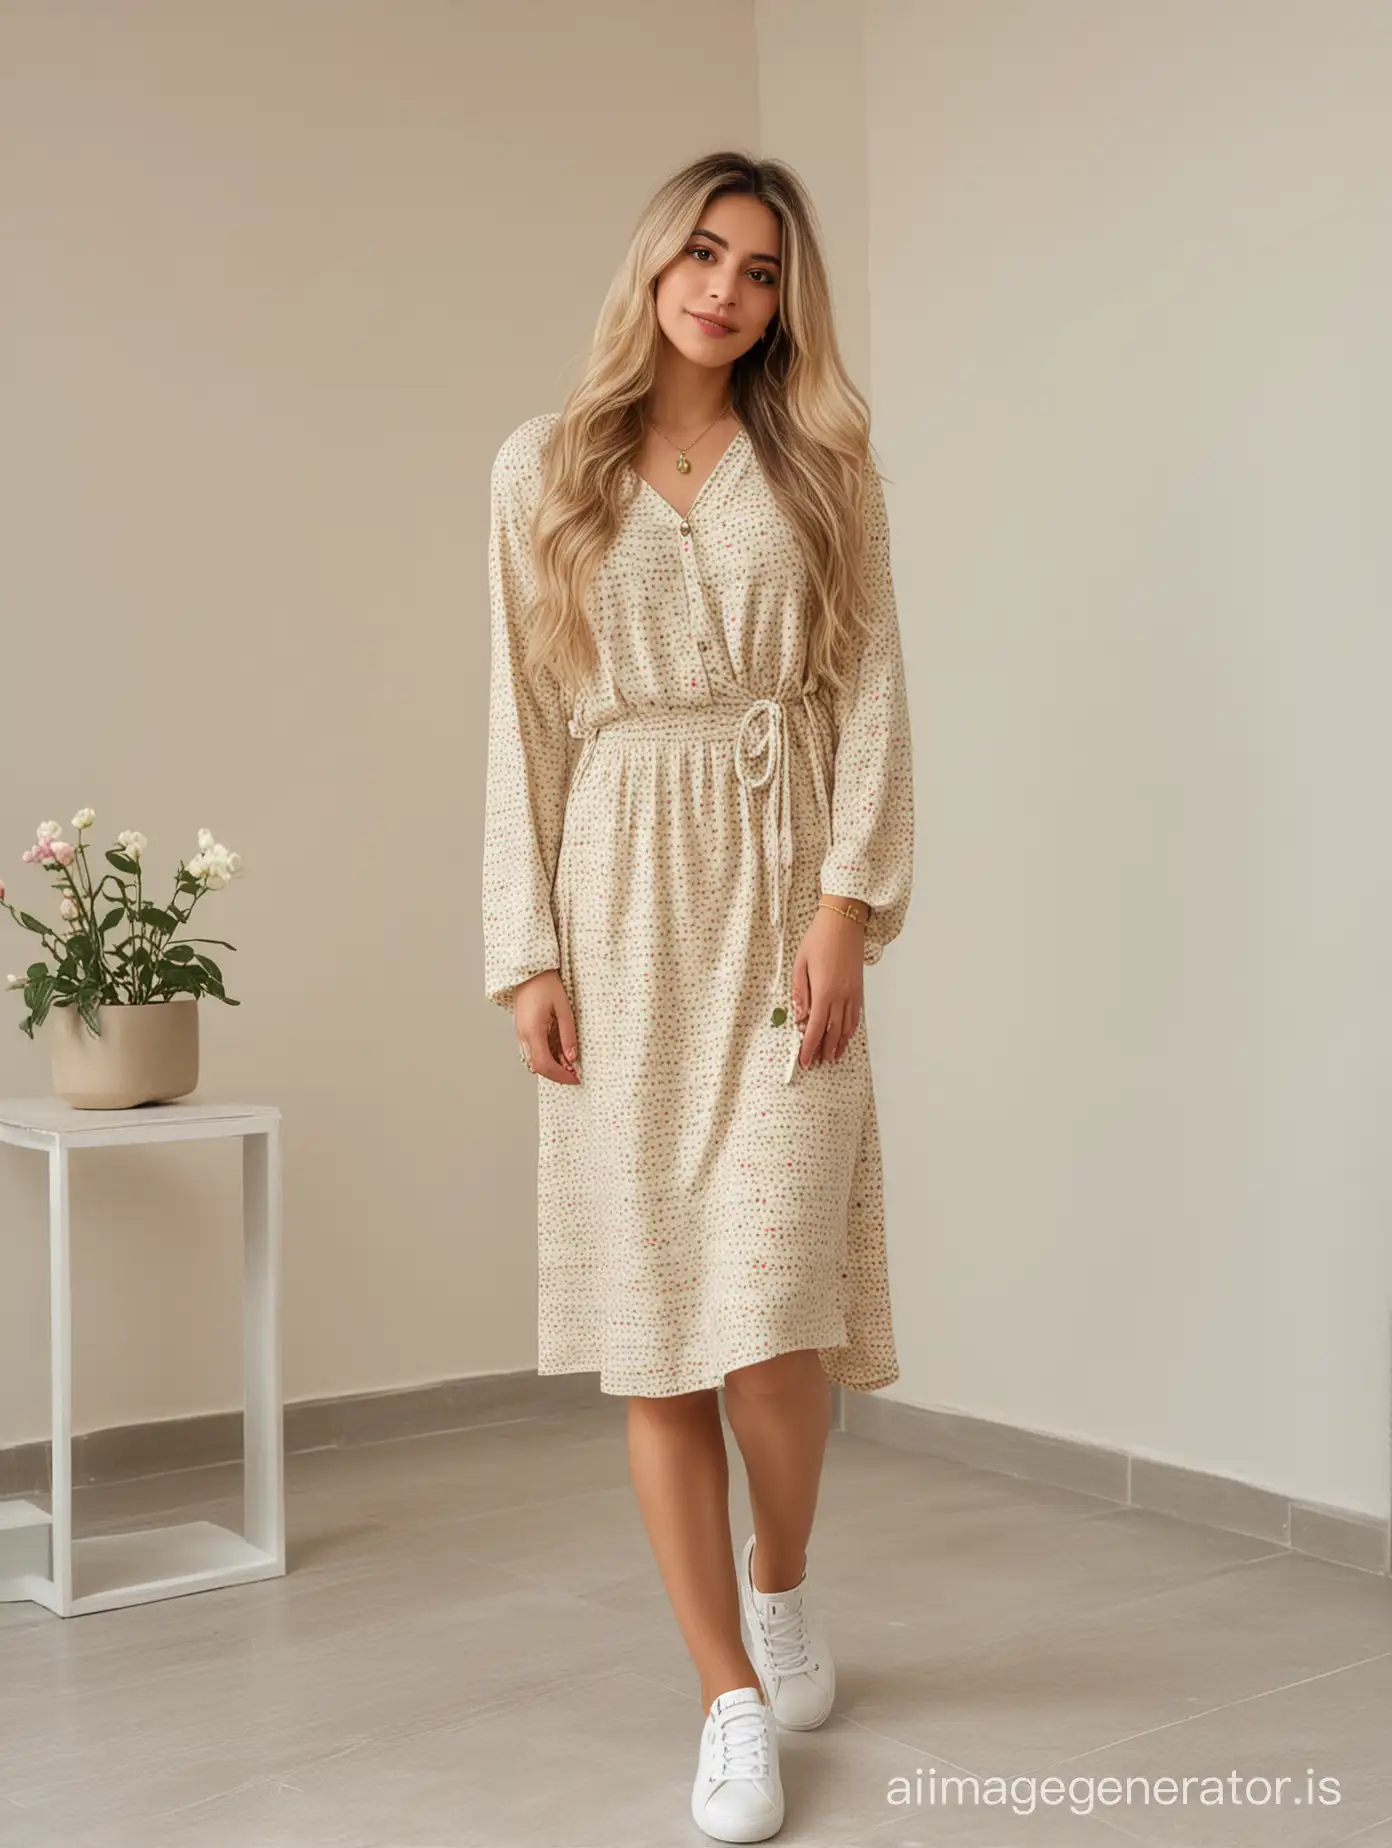 iranian woman 30 years old, wearing  beige cozy dress with tiny green and yellow pattern, white sneakers,  blonde long hair, pink lipsticks, green woody bracelet, in a modern minimal white room, full body shot